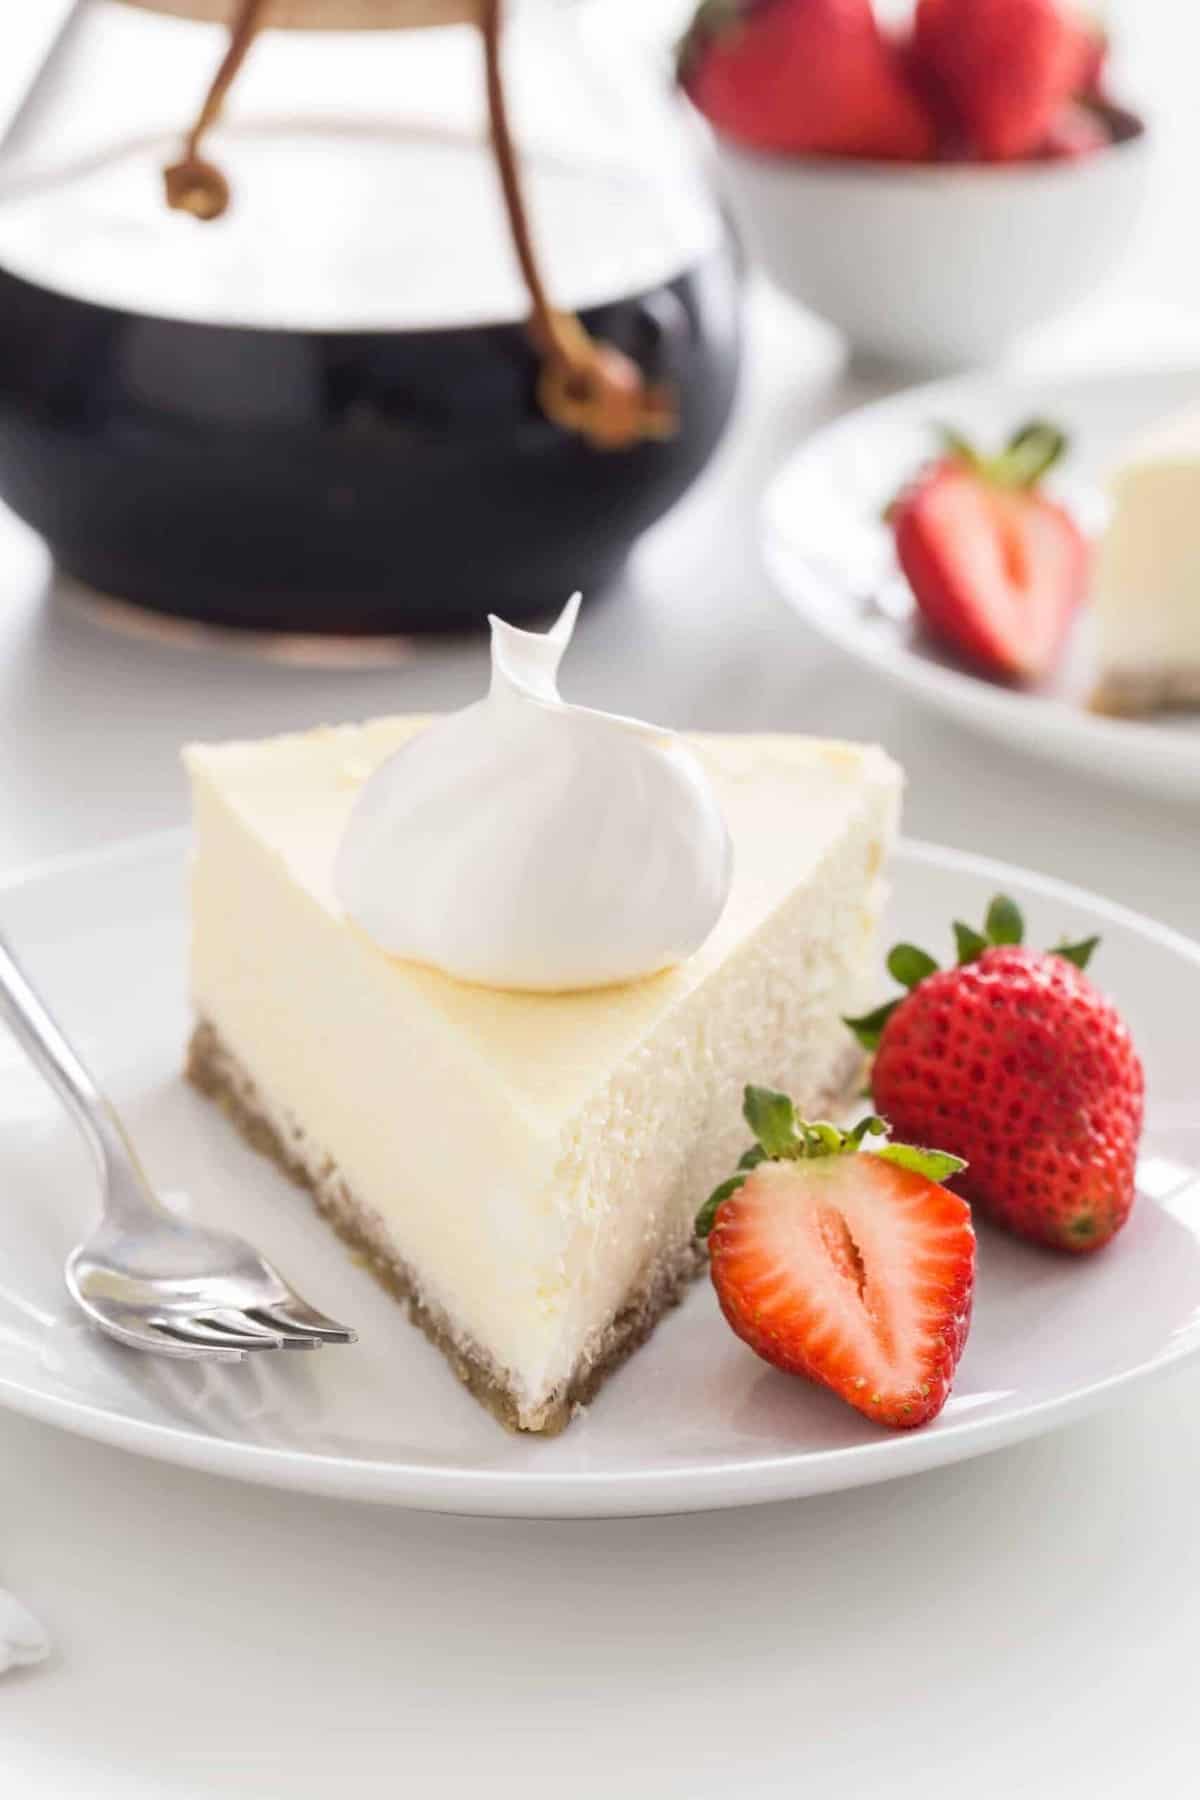 Low Carb Cheesecake has all the delicious flavor and creamy texture of traditional cheesecake without the added sugar. Perfect for anyone watching their sugar intake.